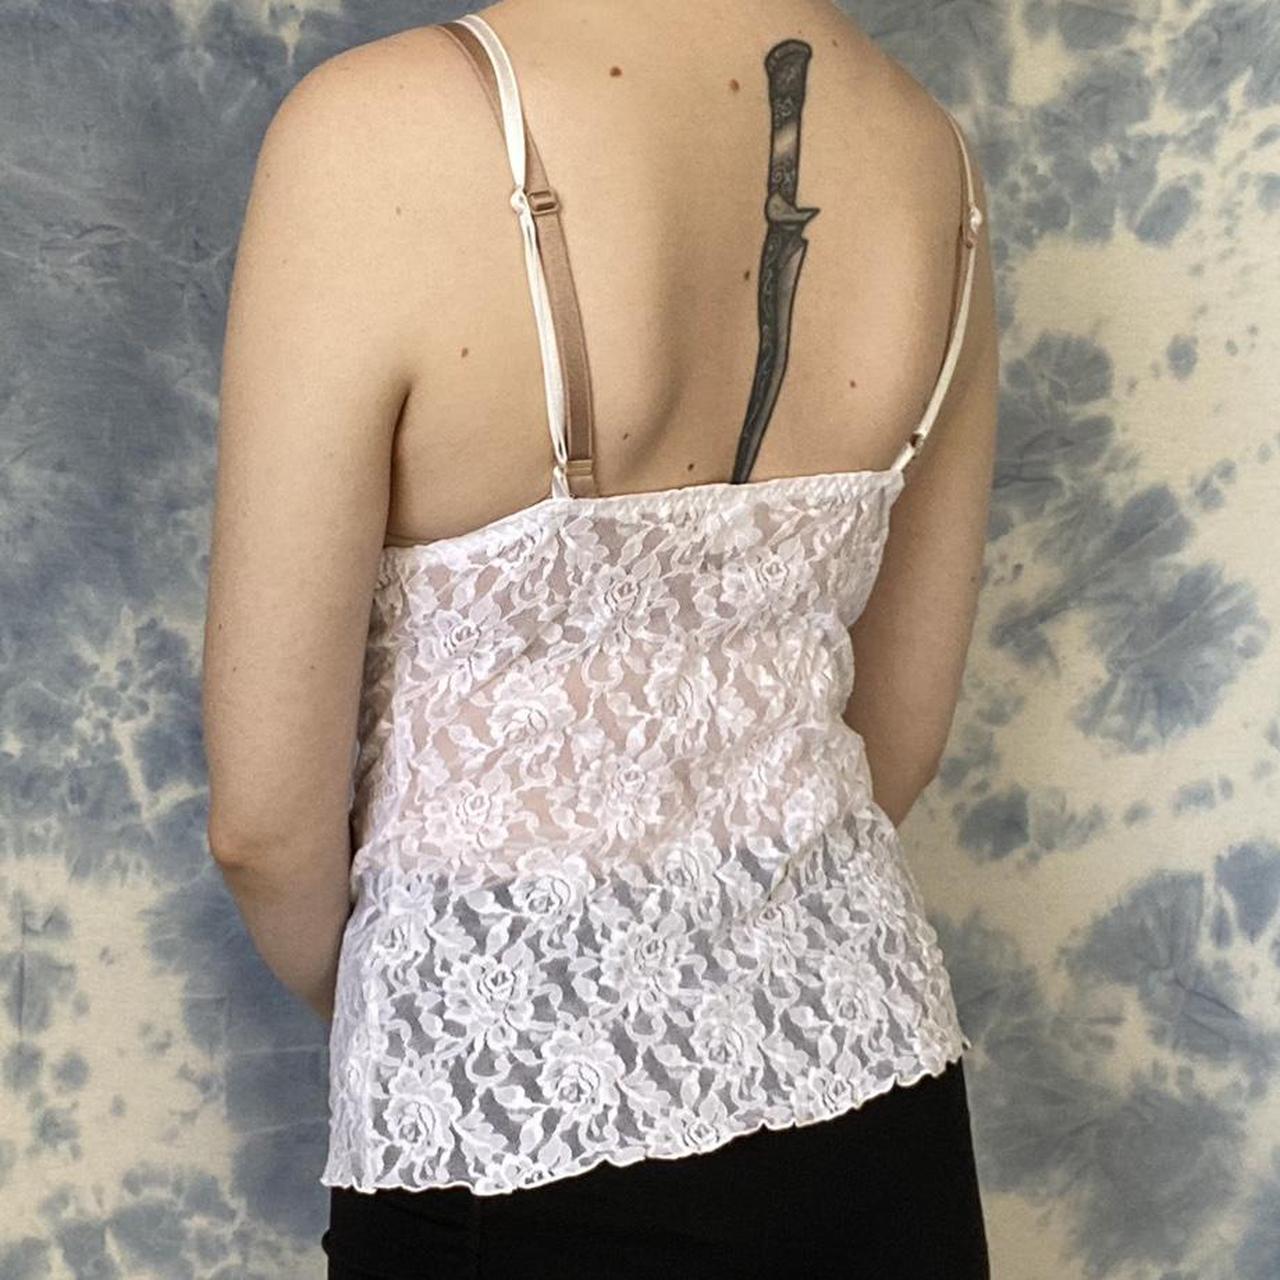 Product Image 2 - vintage white lace cami 🕊

an